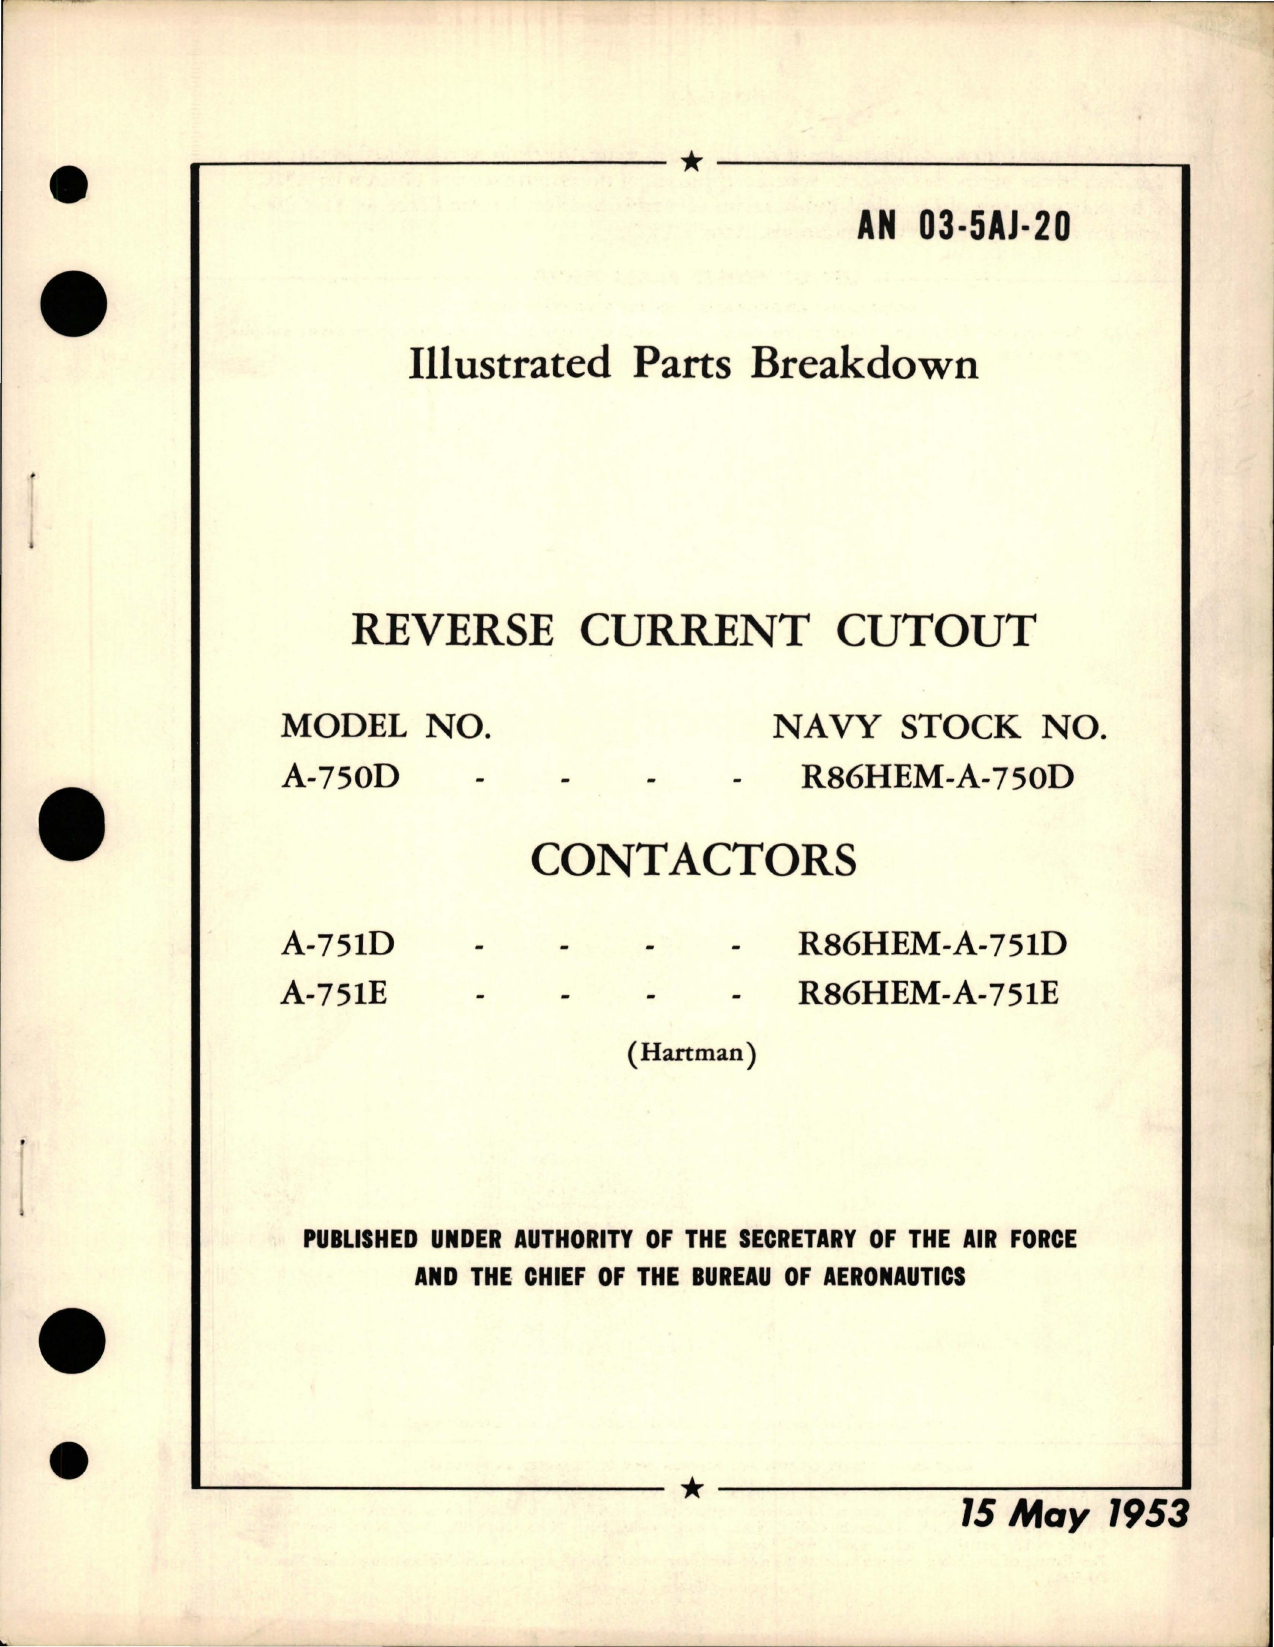 Sample page 1 from AirCorps Library document: Illustrated Parts Breakdown for Reverse Current Cutout - Model A-750D and Contactors - Models A-751D and A-751E